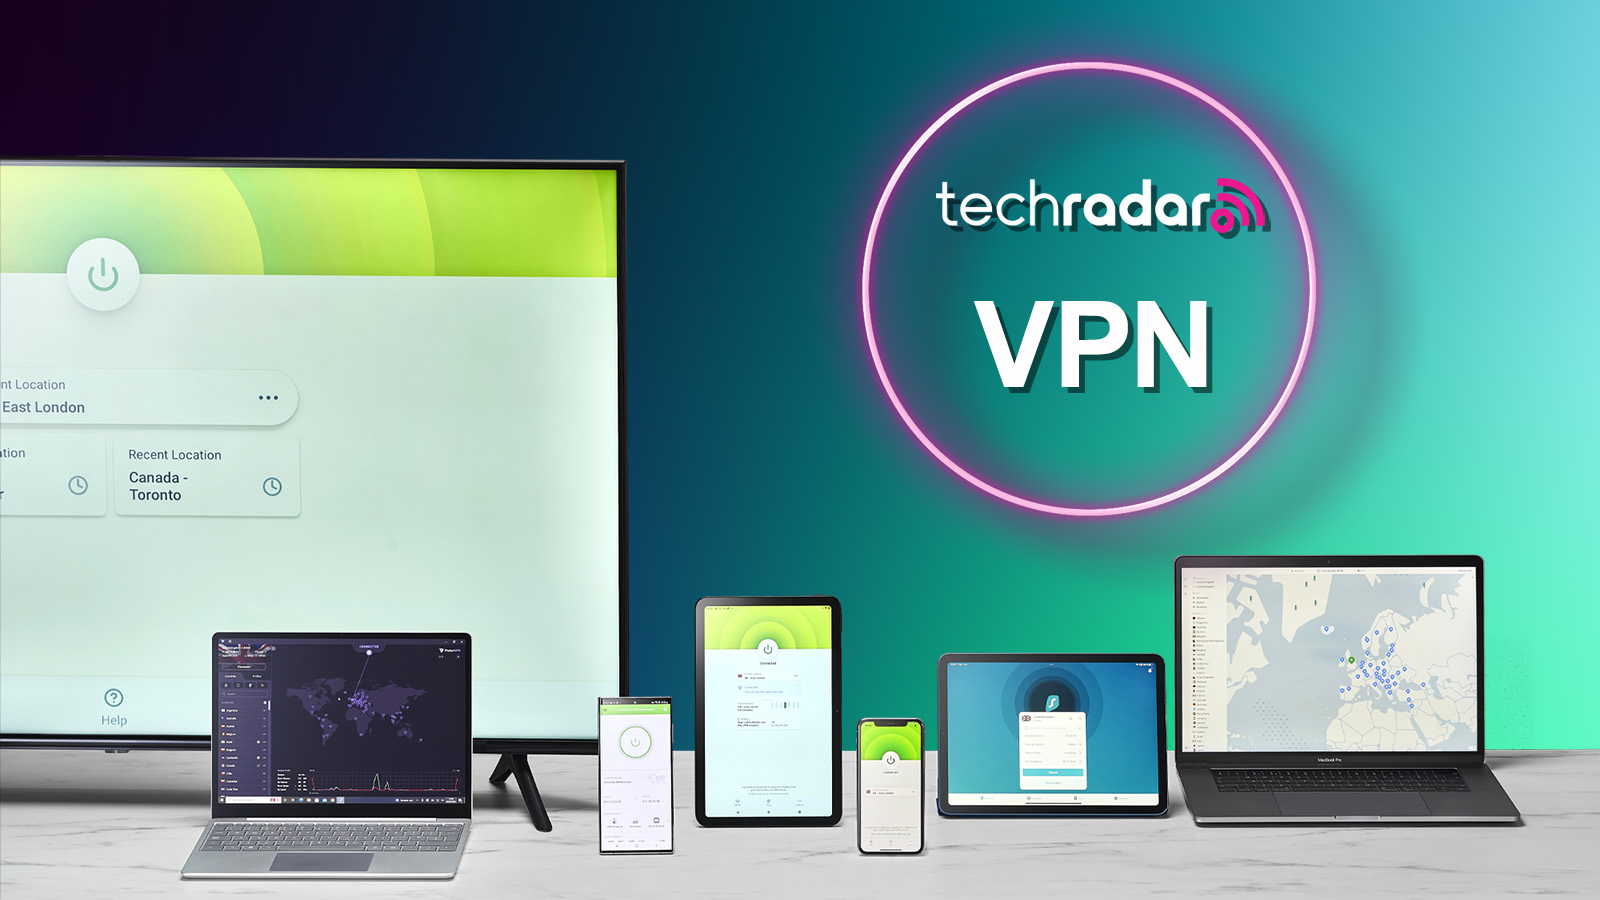 Multiple devices running popular VPN services with the TechRadar logo and 